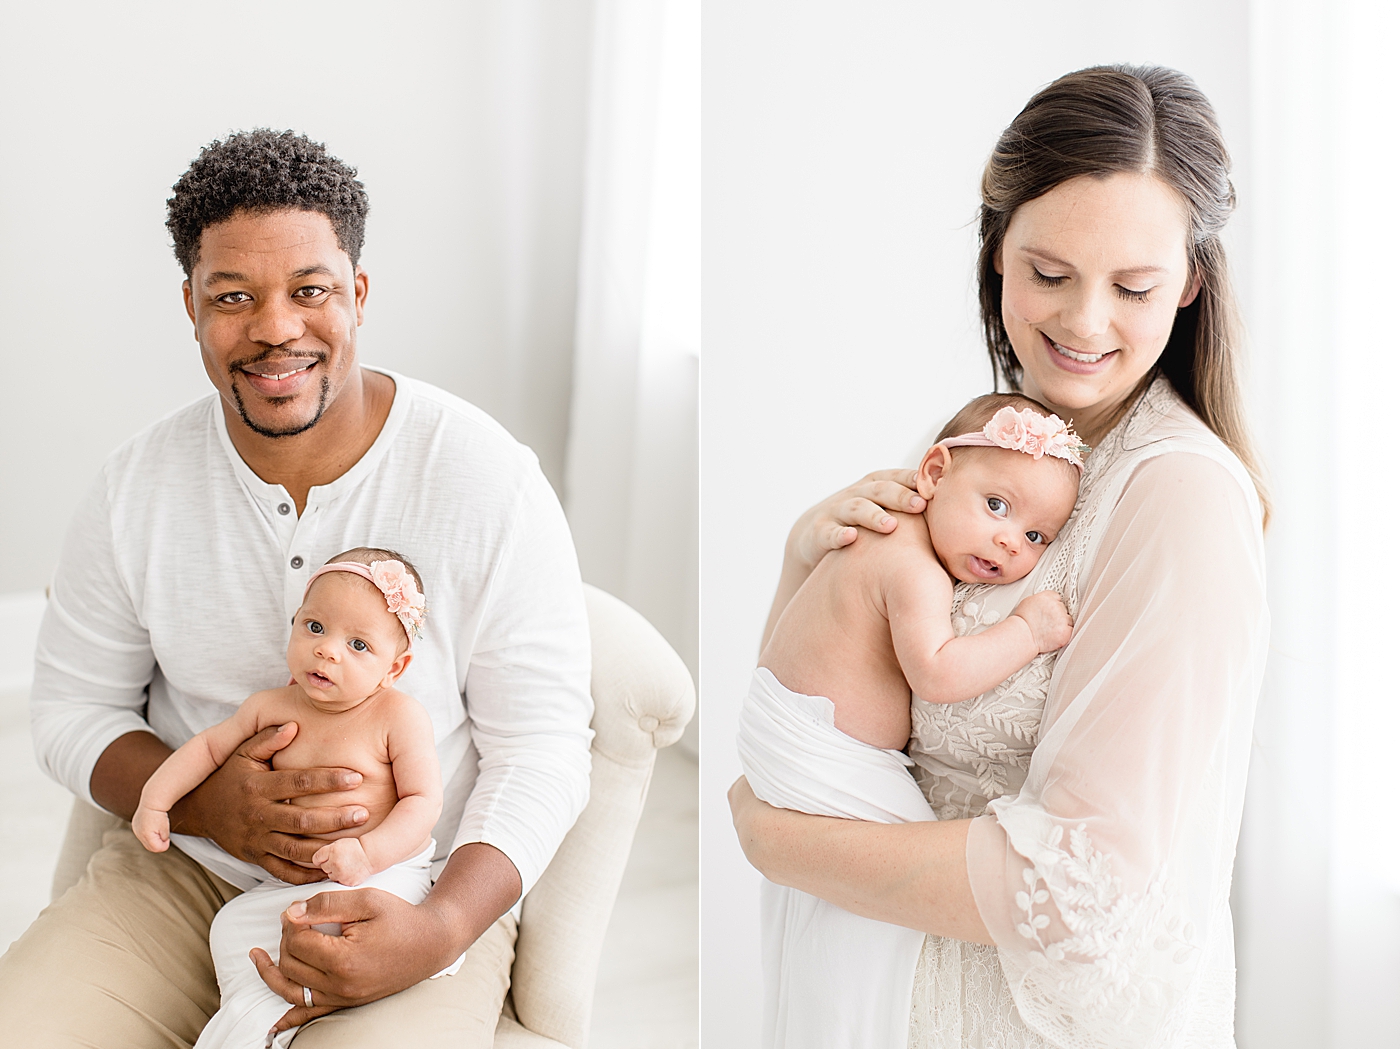 Mom and Dad holding their daughter for newborn photos. Photo by Brittany Elise Photography.